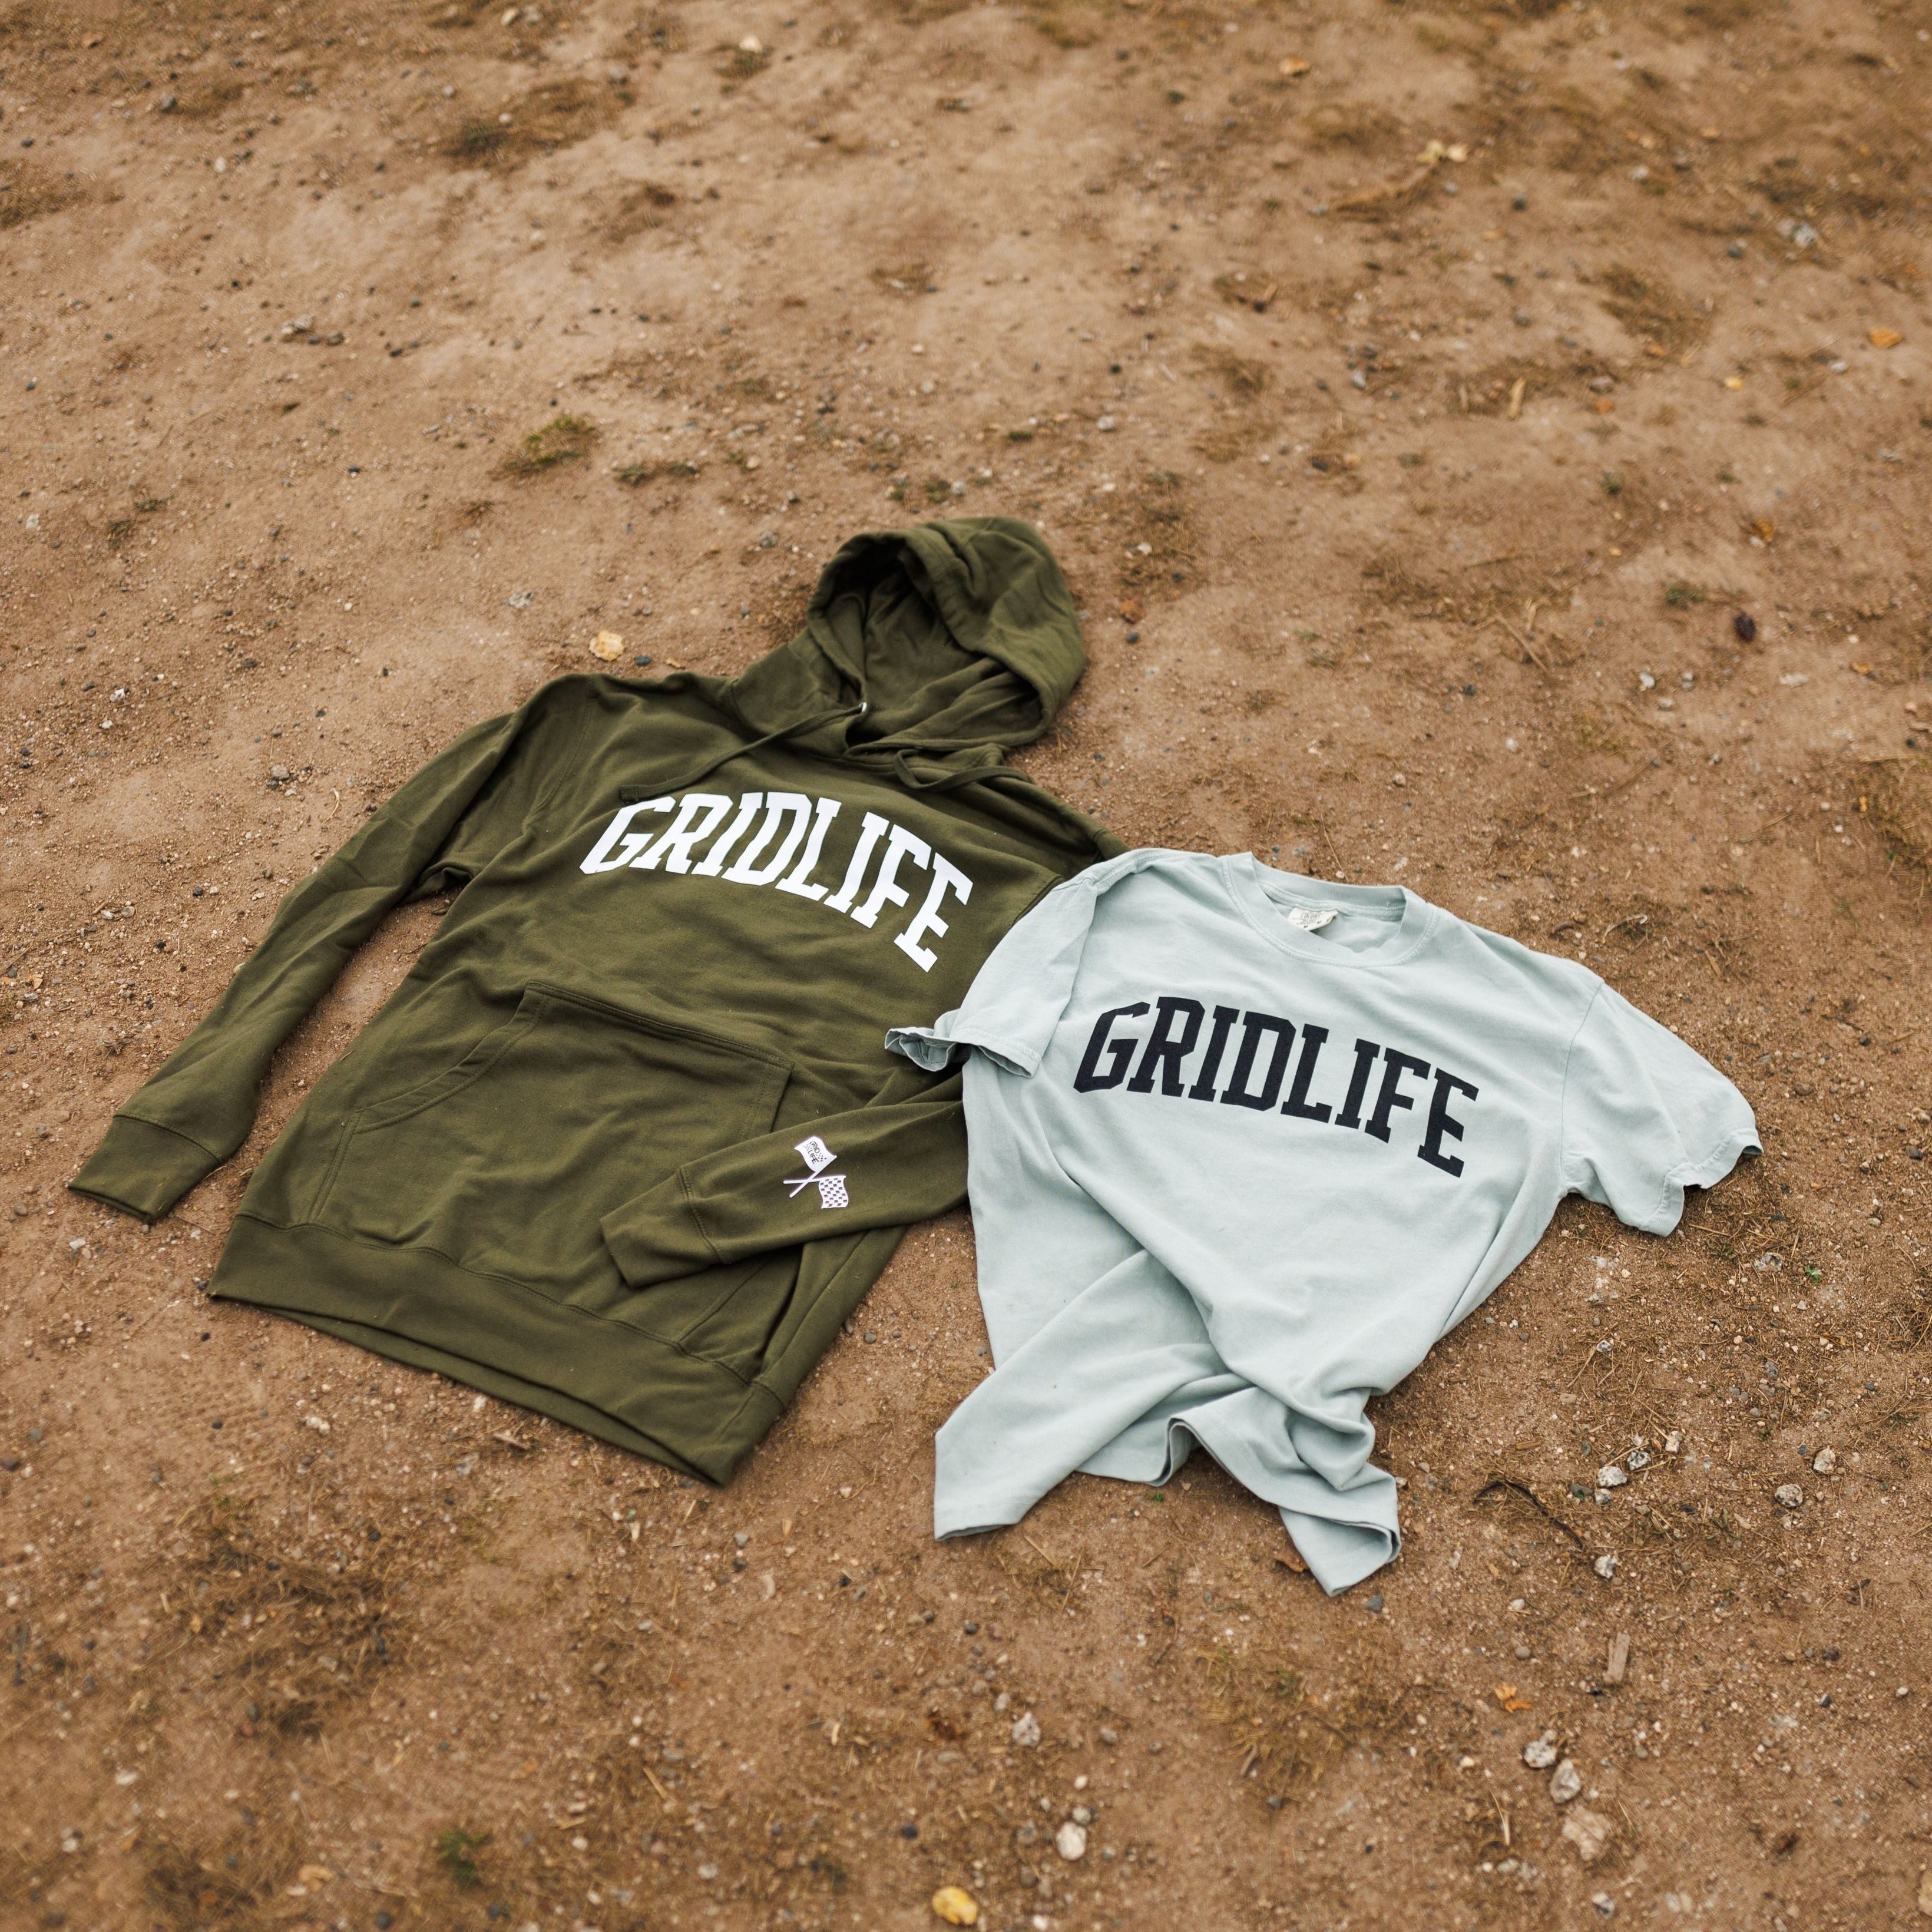 GRIDLIFE college style t-shirt with the matching sweatshirt.